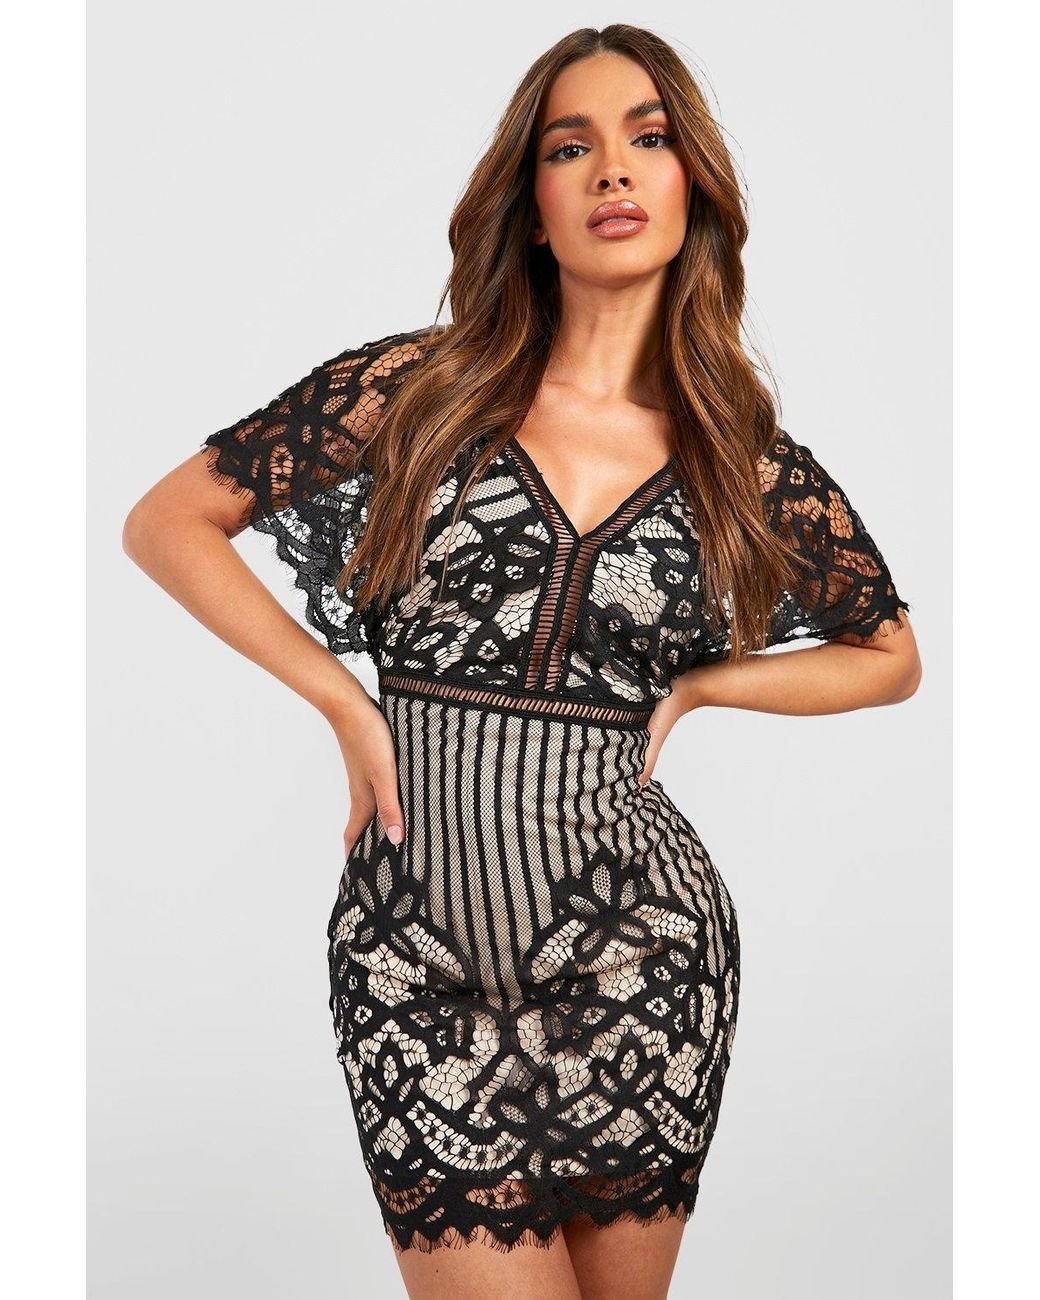 Boohoo Boutique All Over Lace Bodycon Dress in Black | Lyst